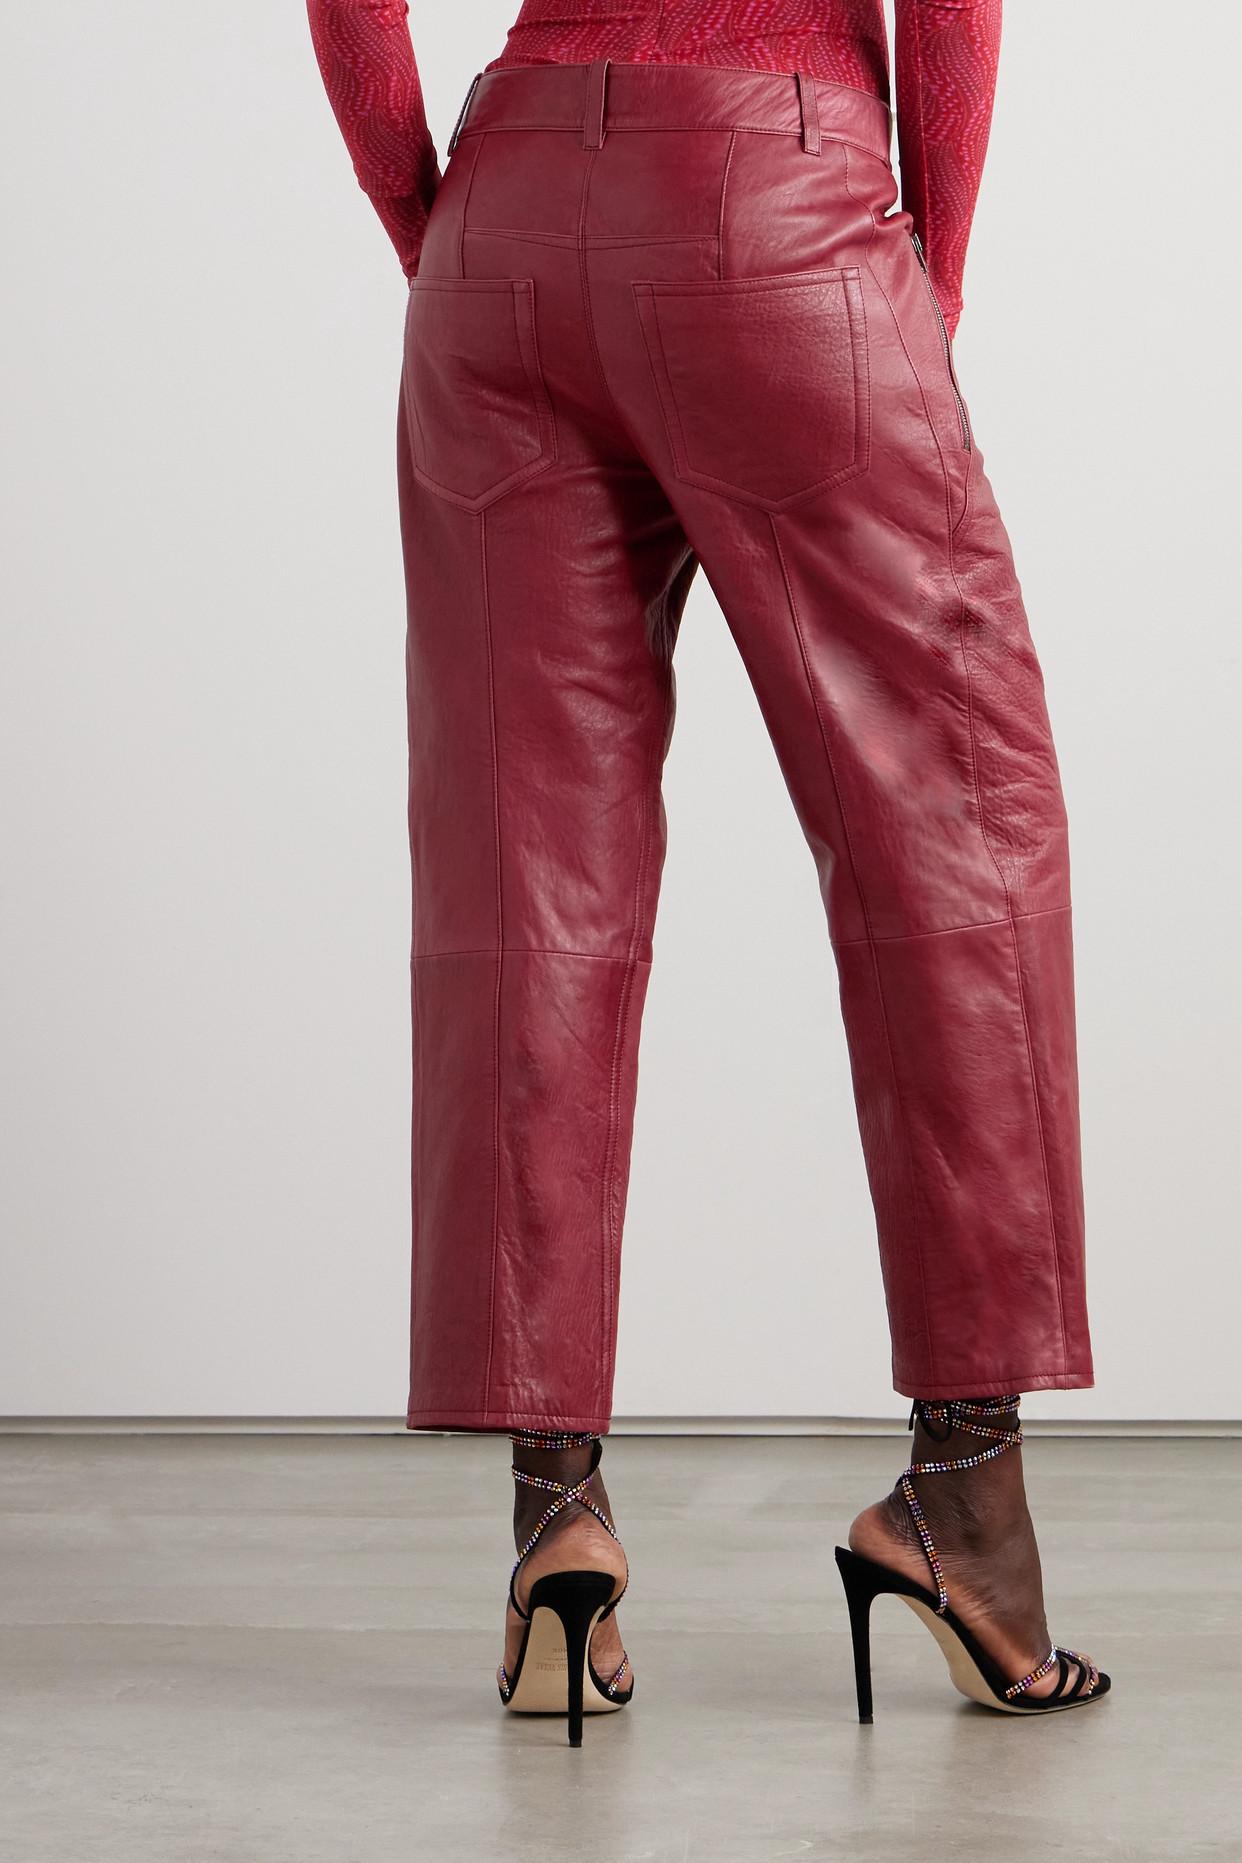 Isabel Marant Berty Cropped Paneled Leather Pants in Red | Lyst